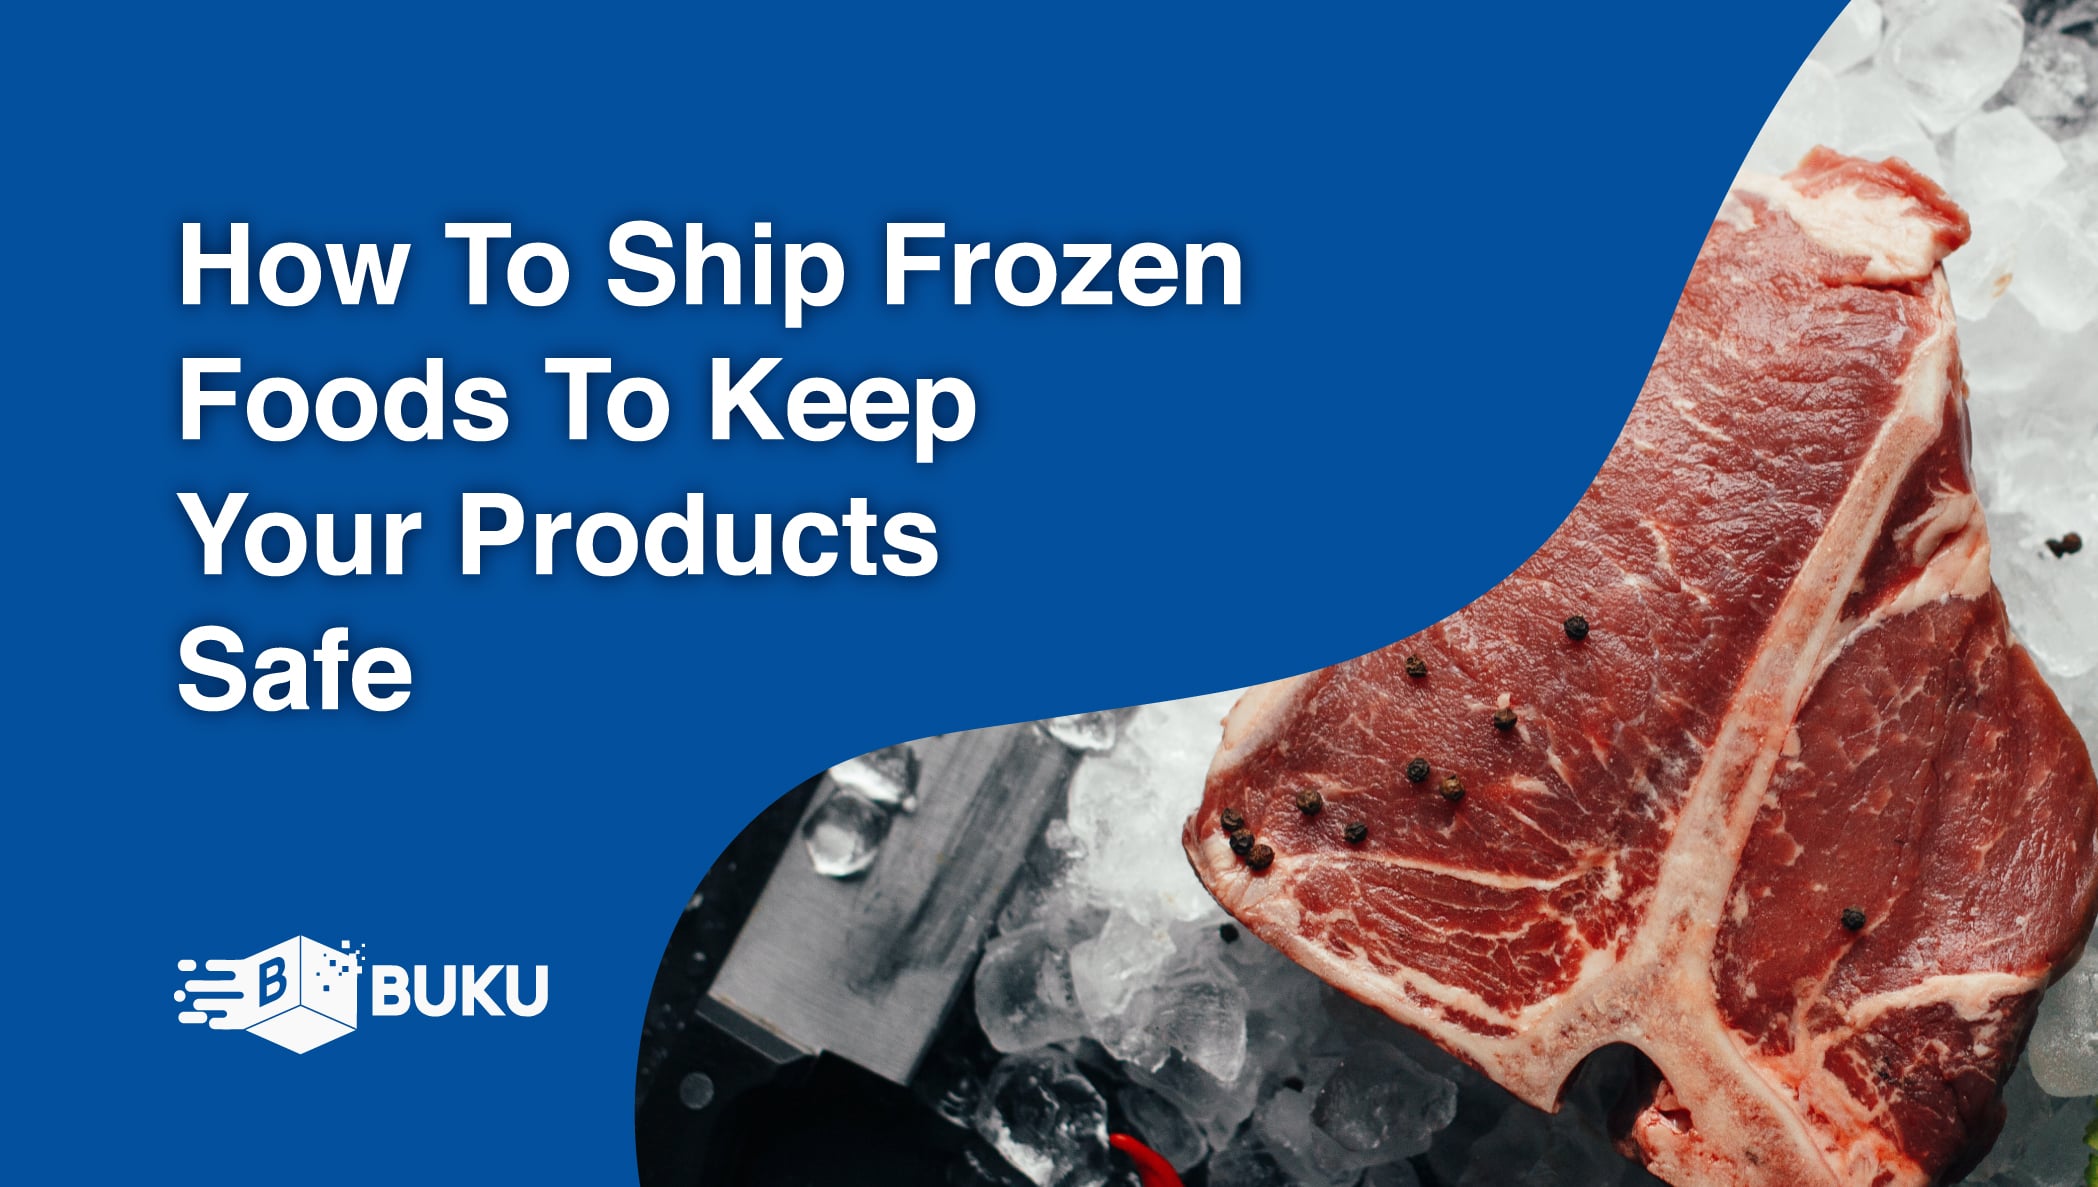 How to ship frozen foods